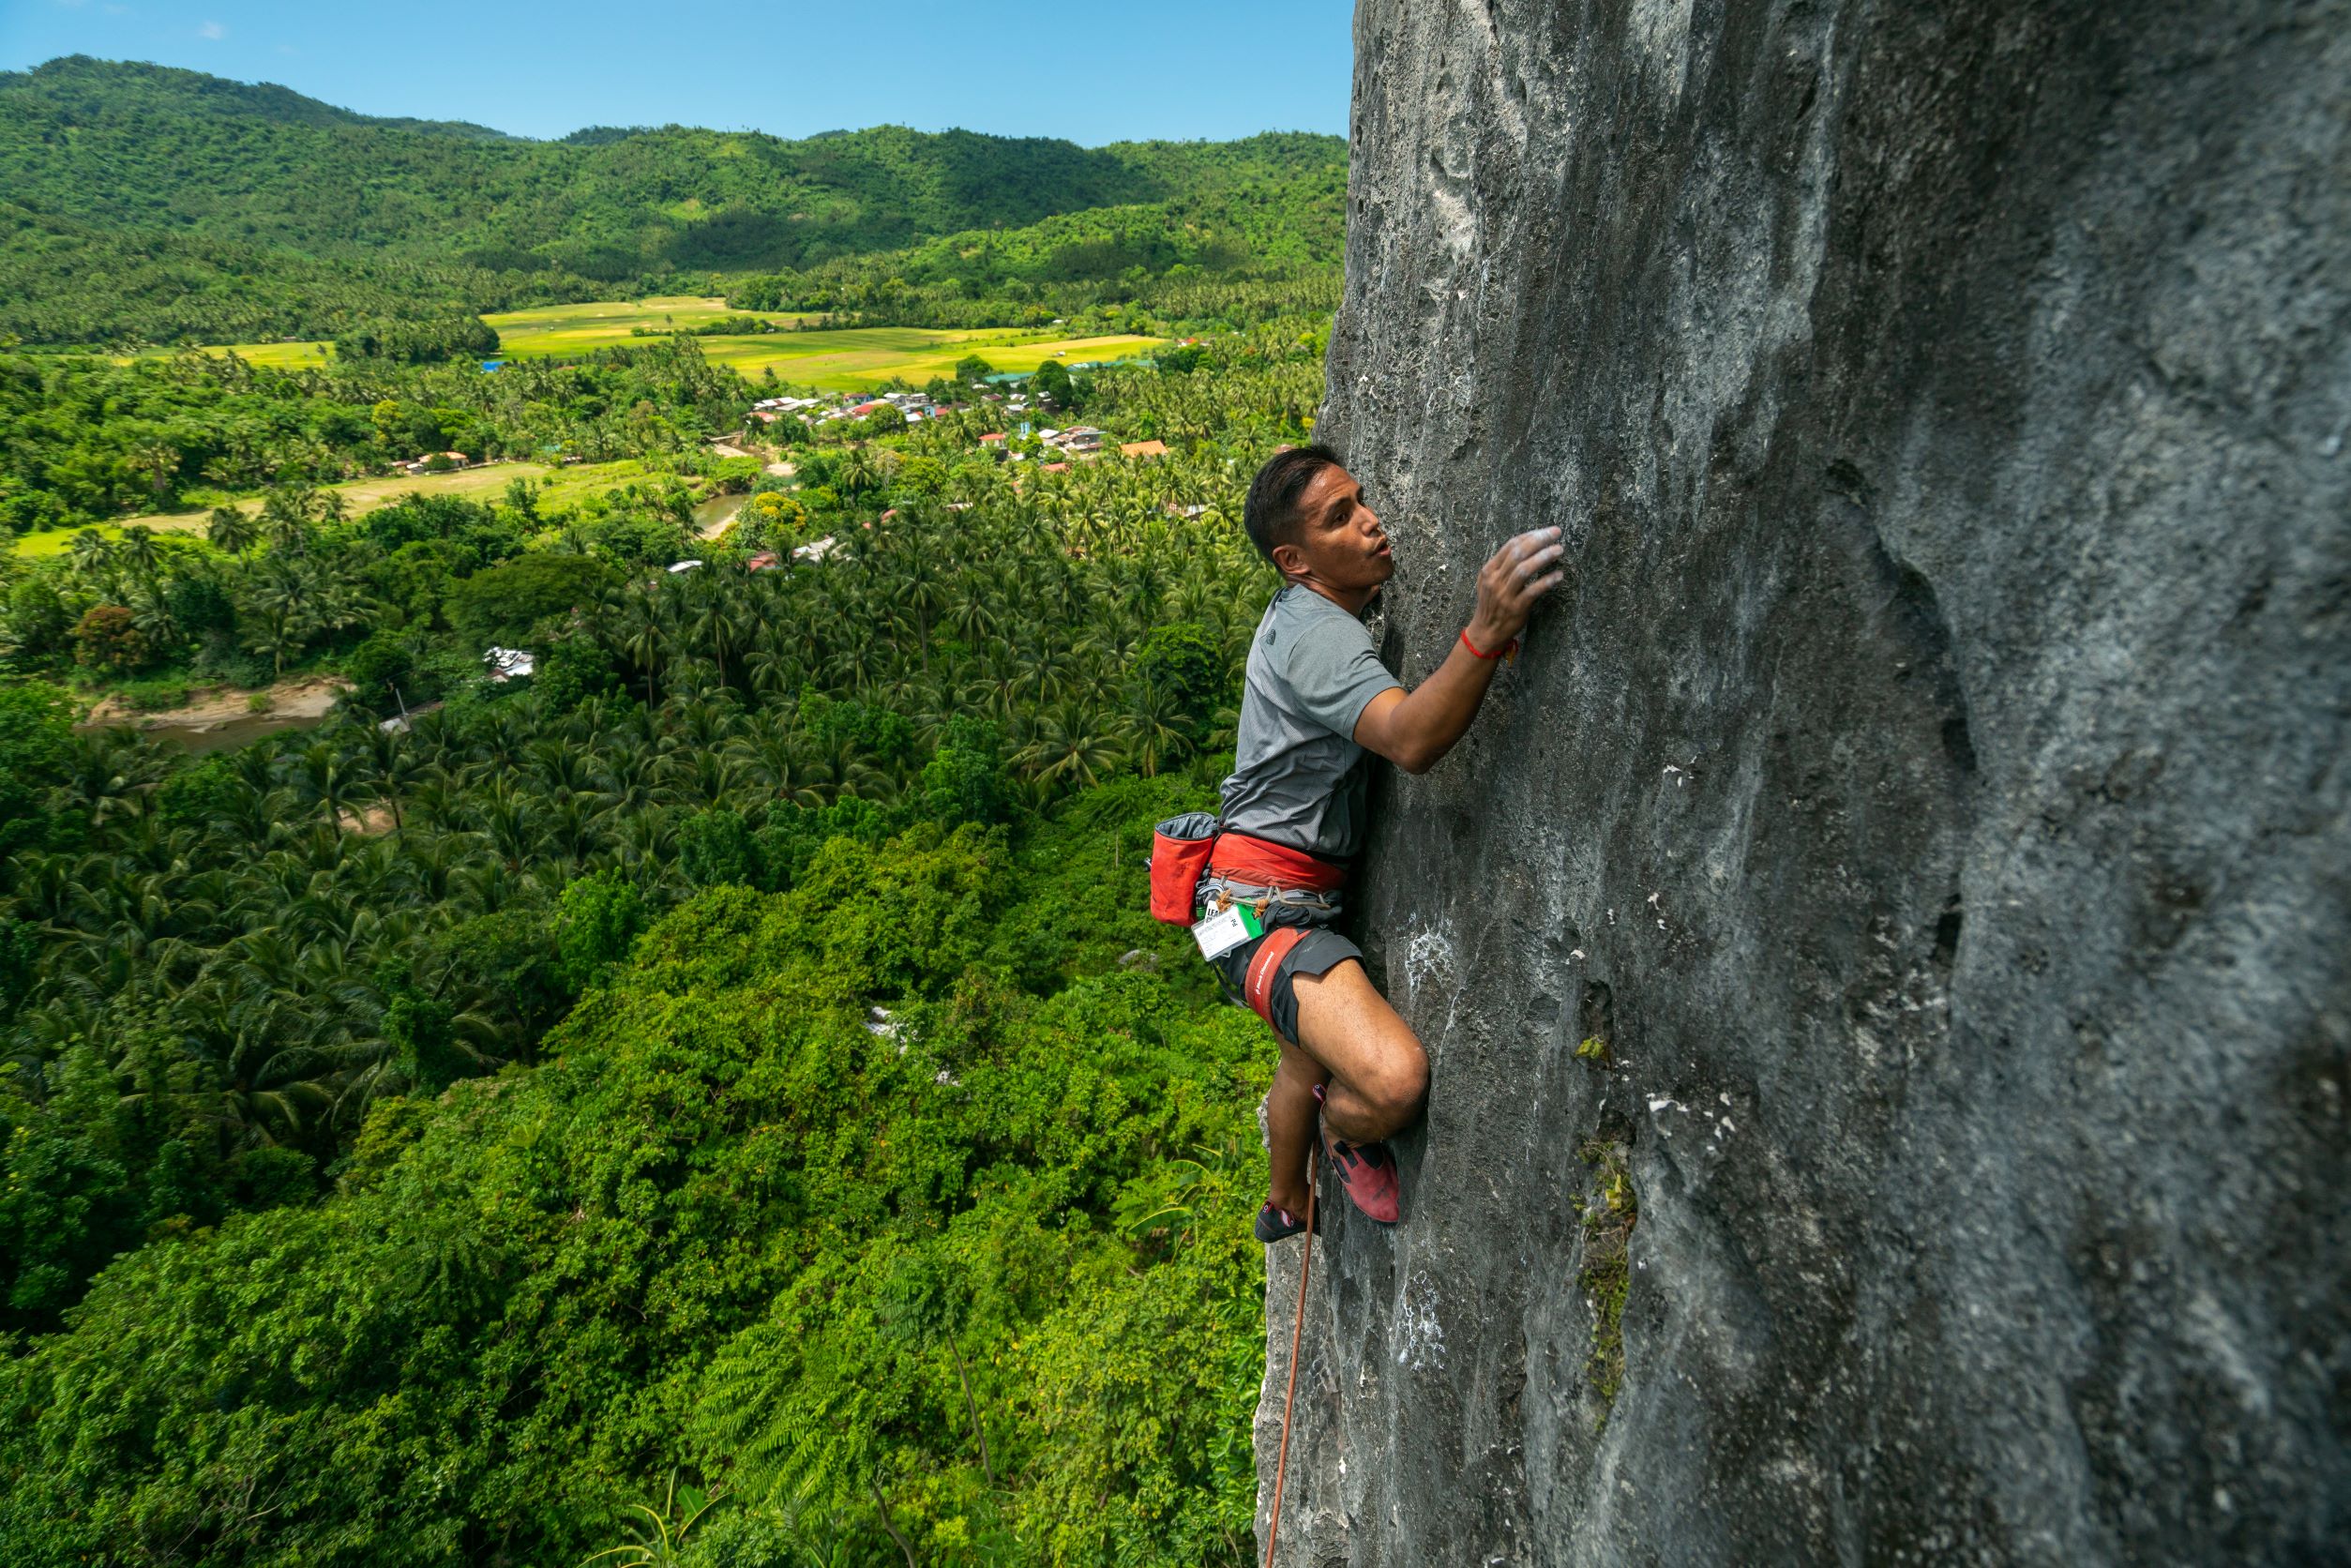 A climber on the limestone walls of Dingle crag, Philippines